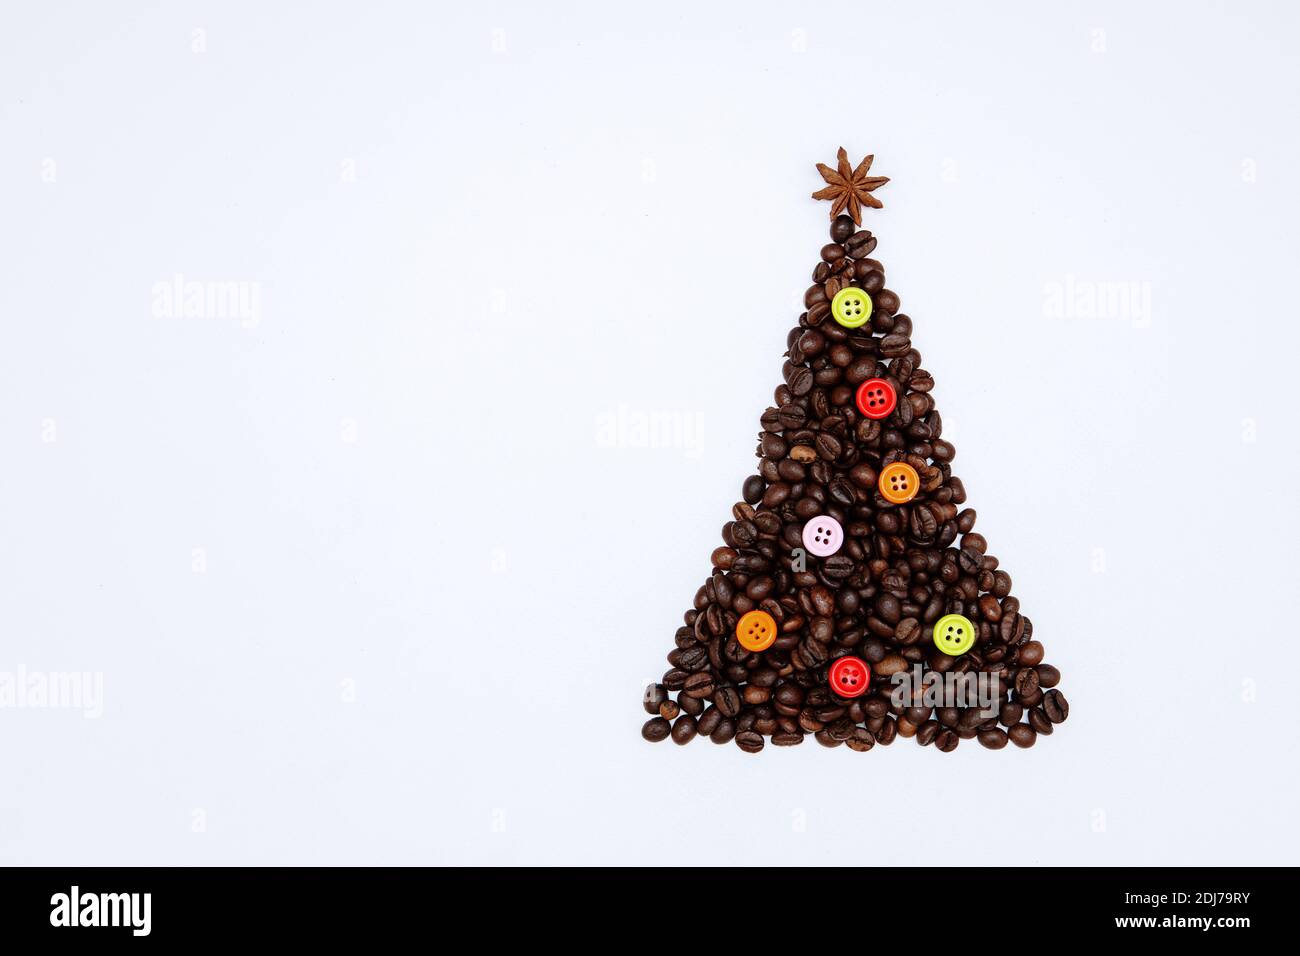 Christmas tree made of coffee beans with anise star on top and colorful buttons as decoration. Minimal Christmas background Stock Photo